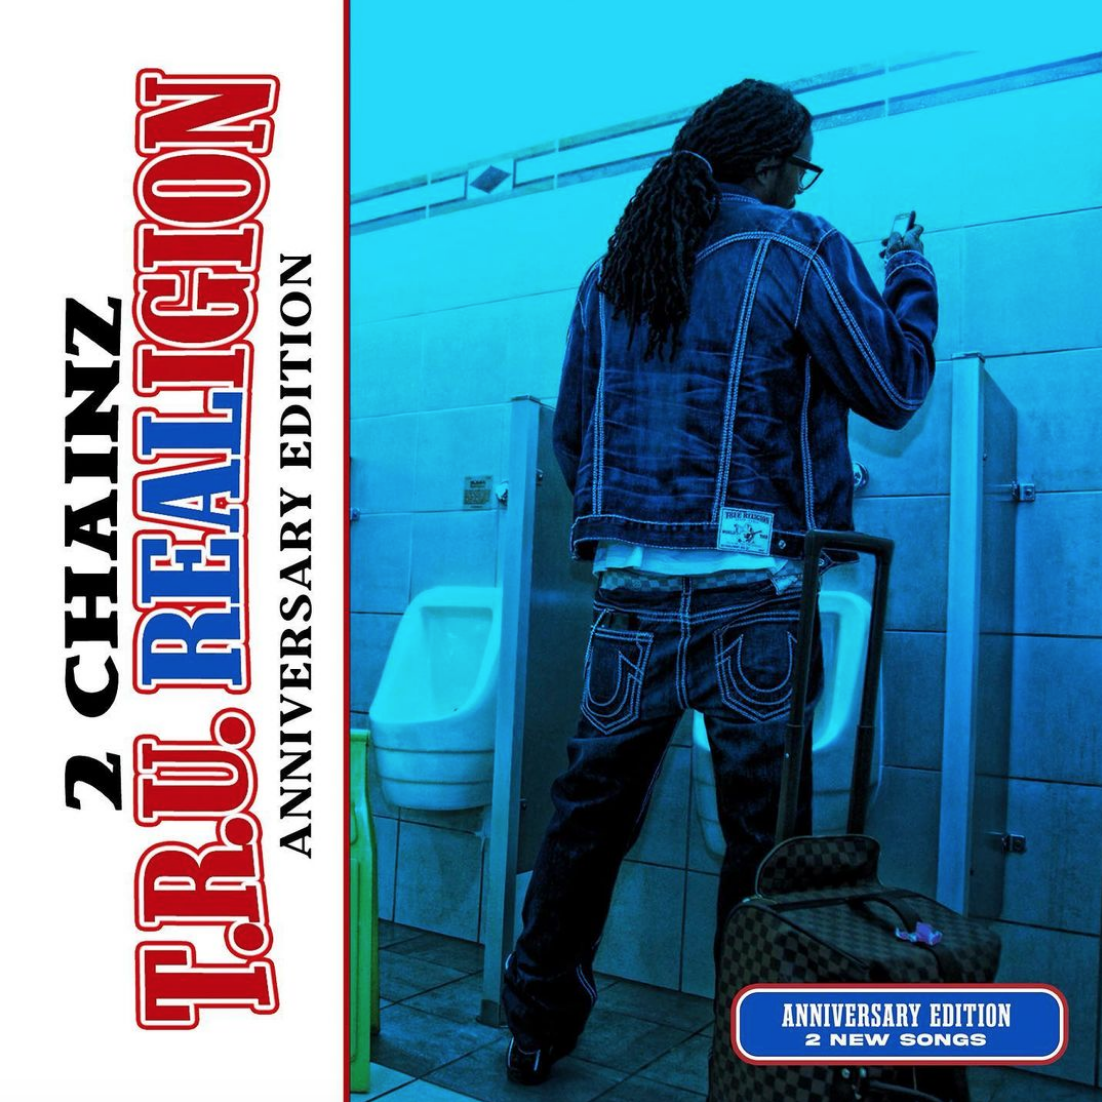 2 Chainz Drops Two New Songs on 10-Year Anniversary Edition of 'T.R.U Realigion' Mixtape